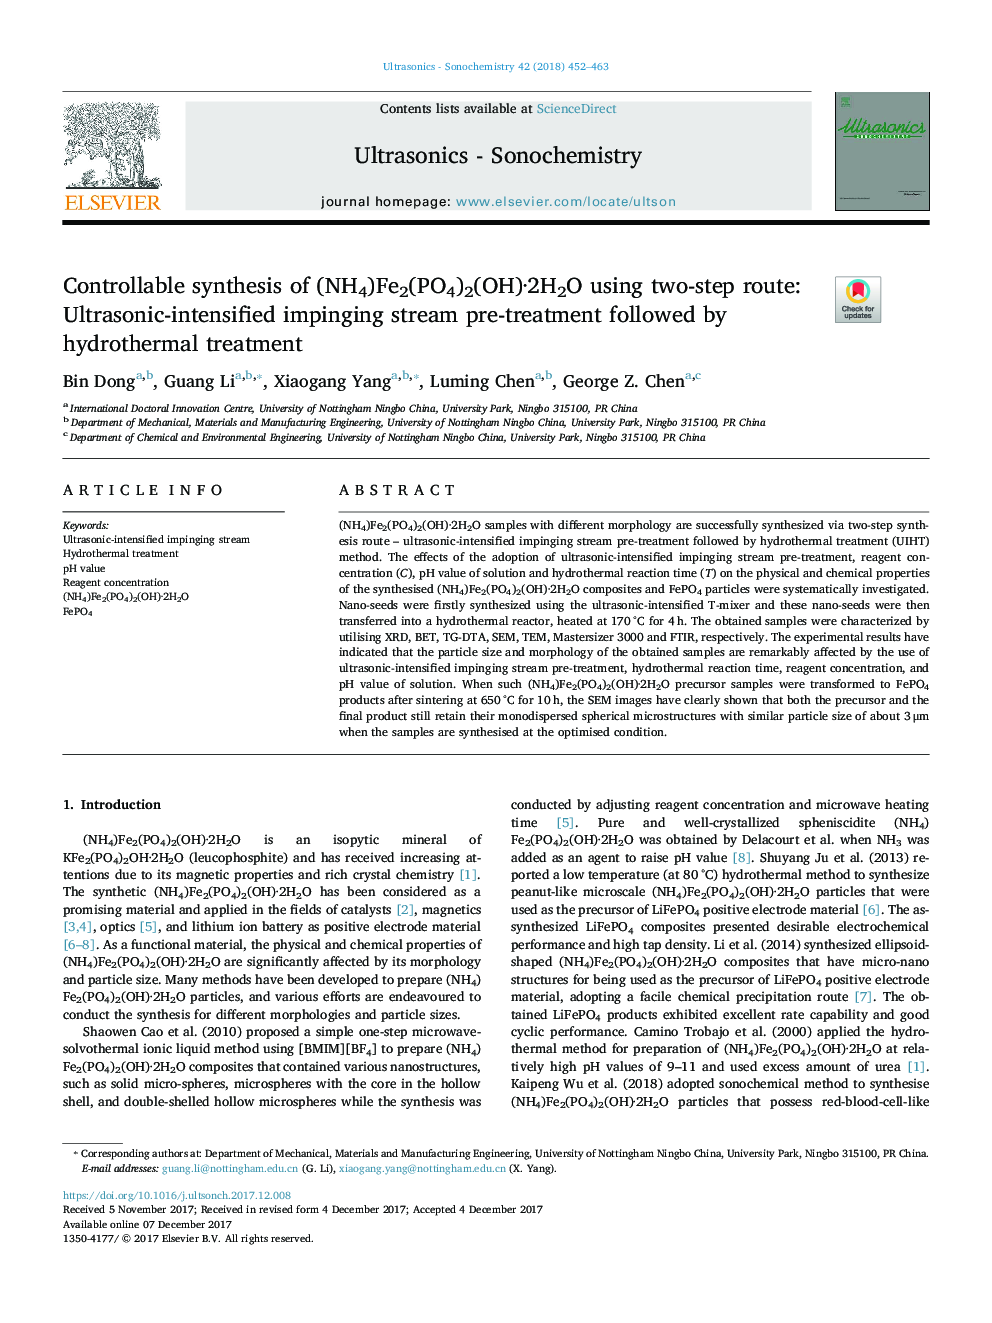 Controllable synthesis of (NH4)Fe2(PO4)2(OH)Â·2H2O using two-step route: Ultrasonic-intensified impinging stream pre-treatment followed by hydrothermal treatment